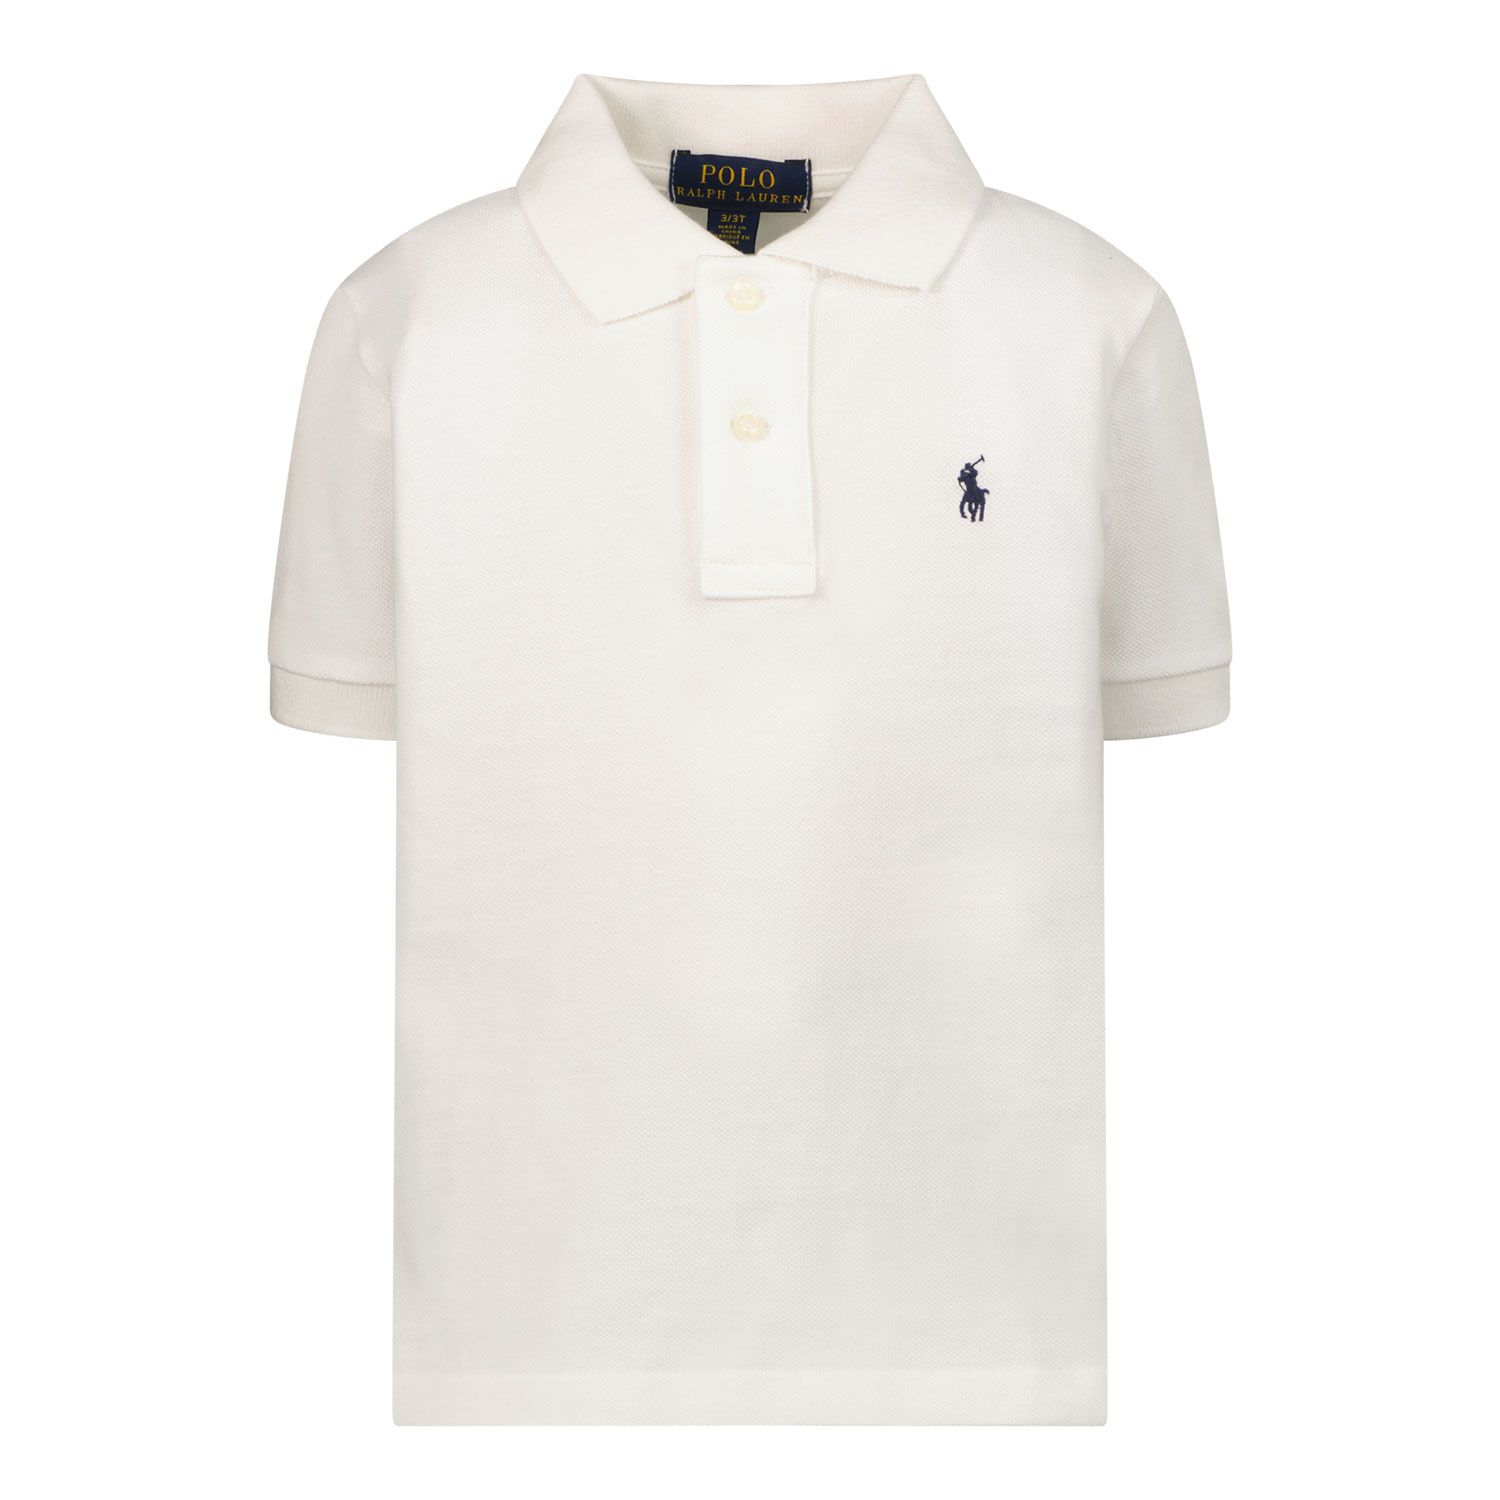 Picture of Ralph Lauren 603252 kids polo shirt white